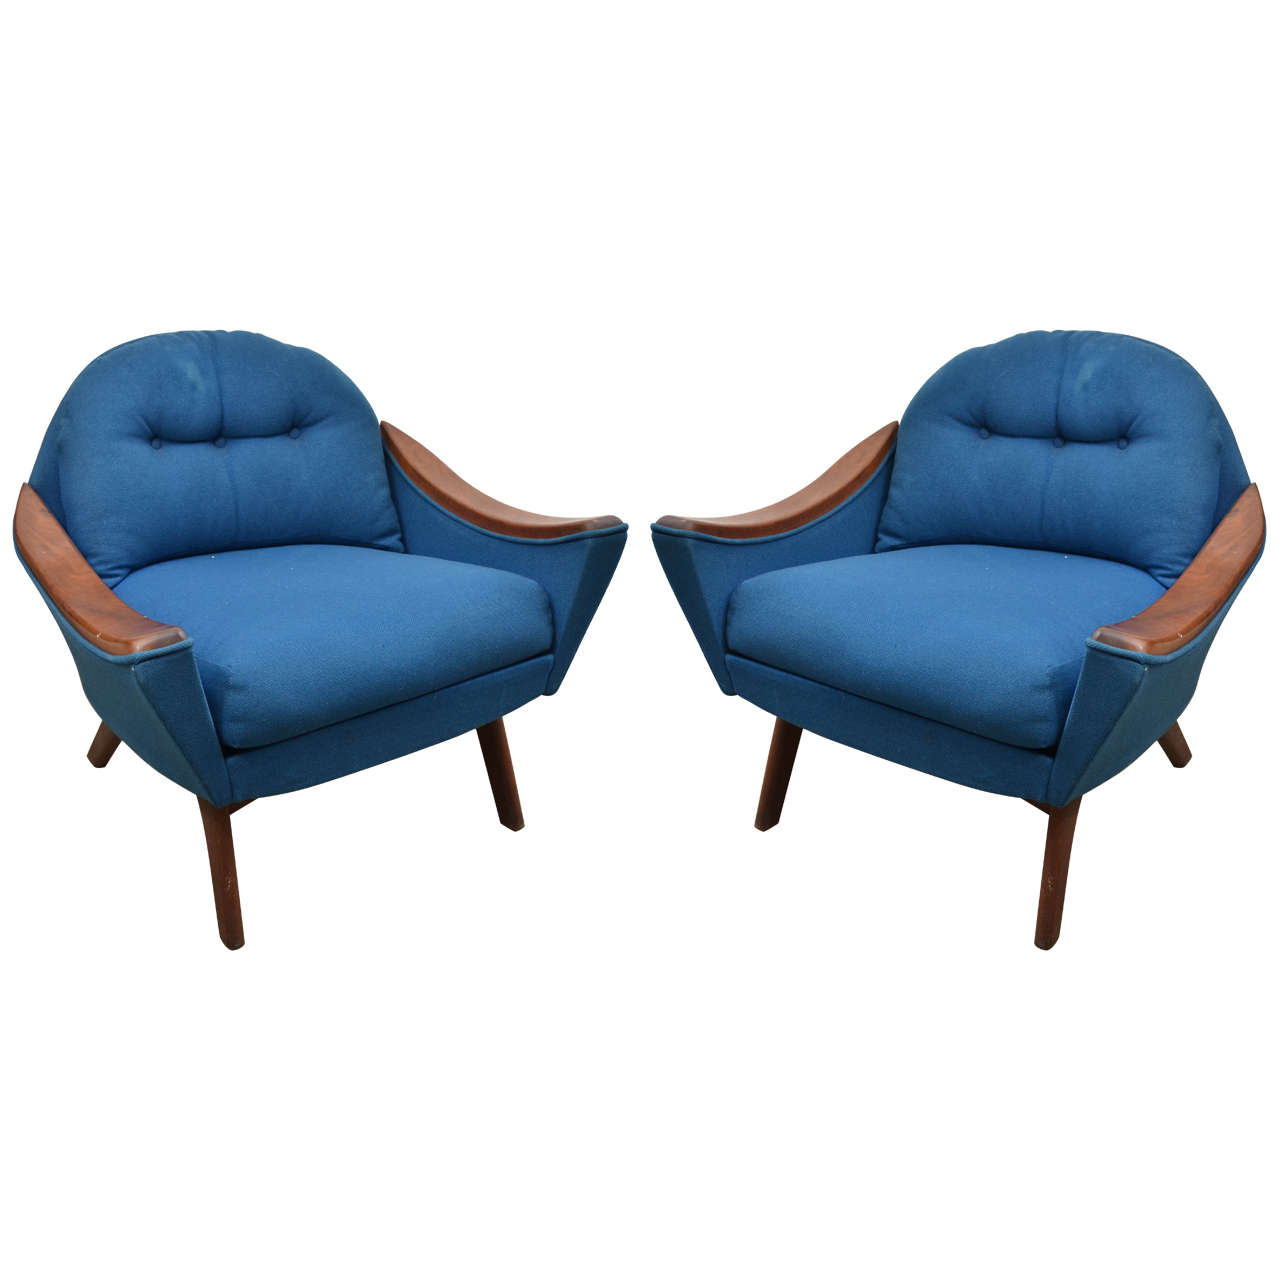 Pair of Adrian Pearsall Chairs For Sale